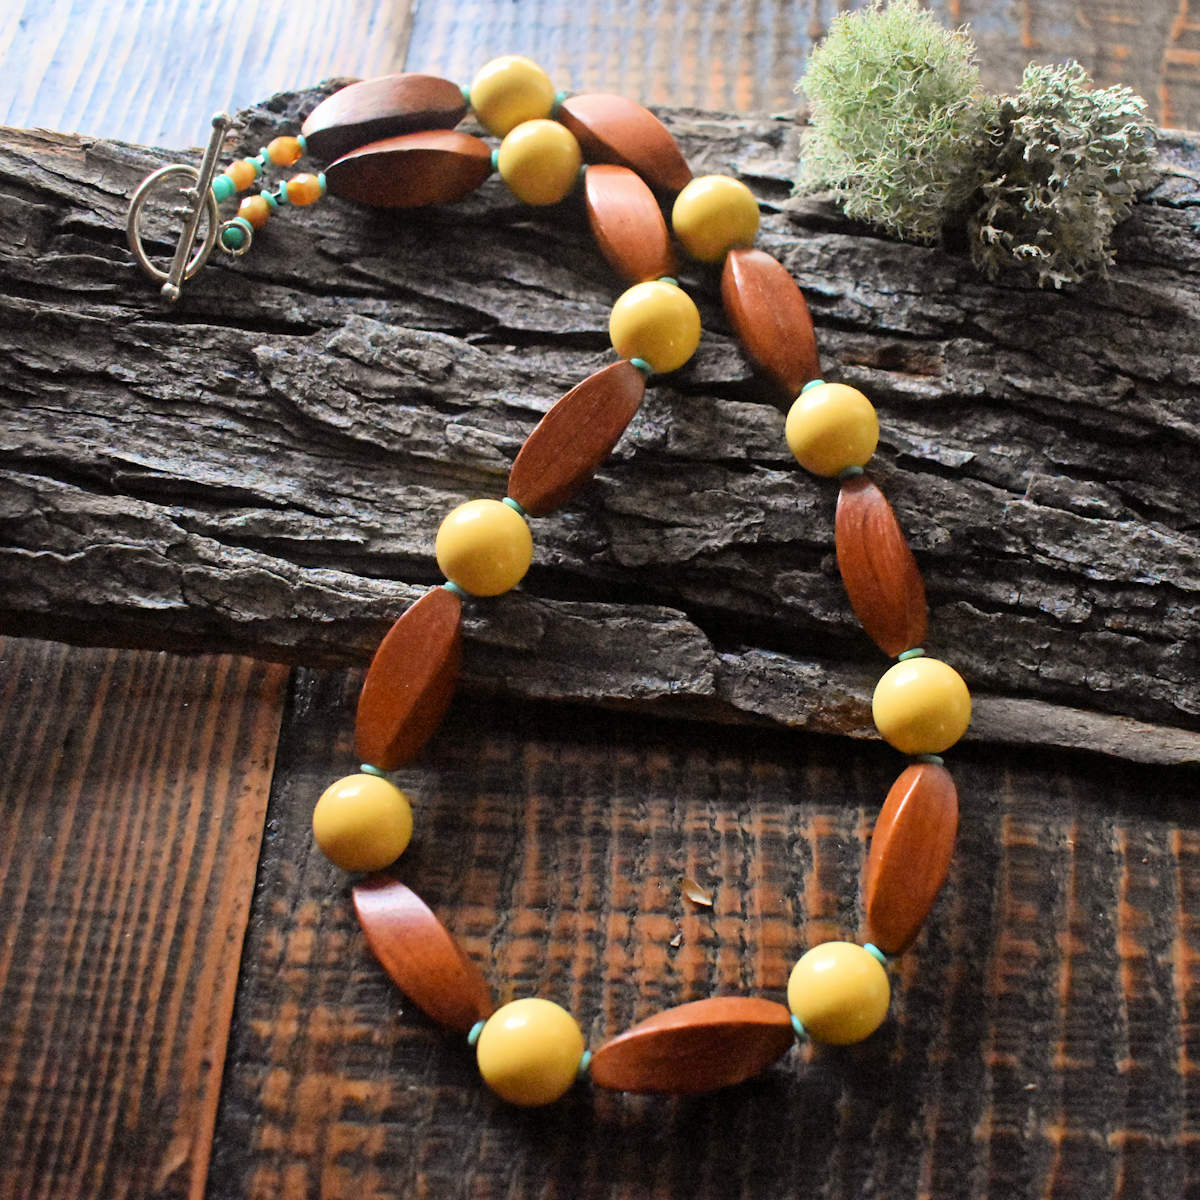 A necklace with warm, almost reddish four sided wooden beads interspersed with butter yellow rounds is draped across a wood backdrop that has some moss on it. There are tiny turquoise spacers between the larger beads of the necklace and the necklace is finished with a toggle clasp.